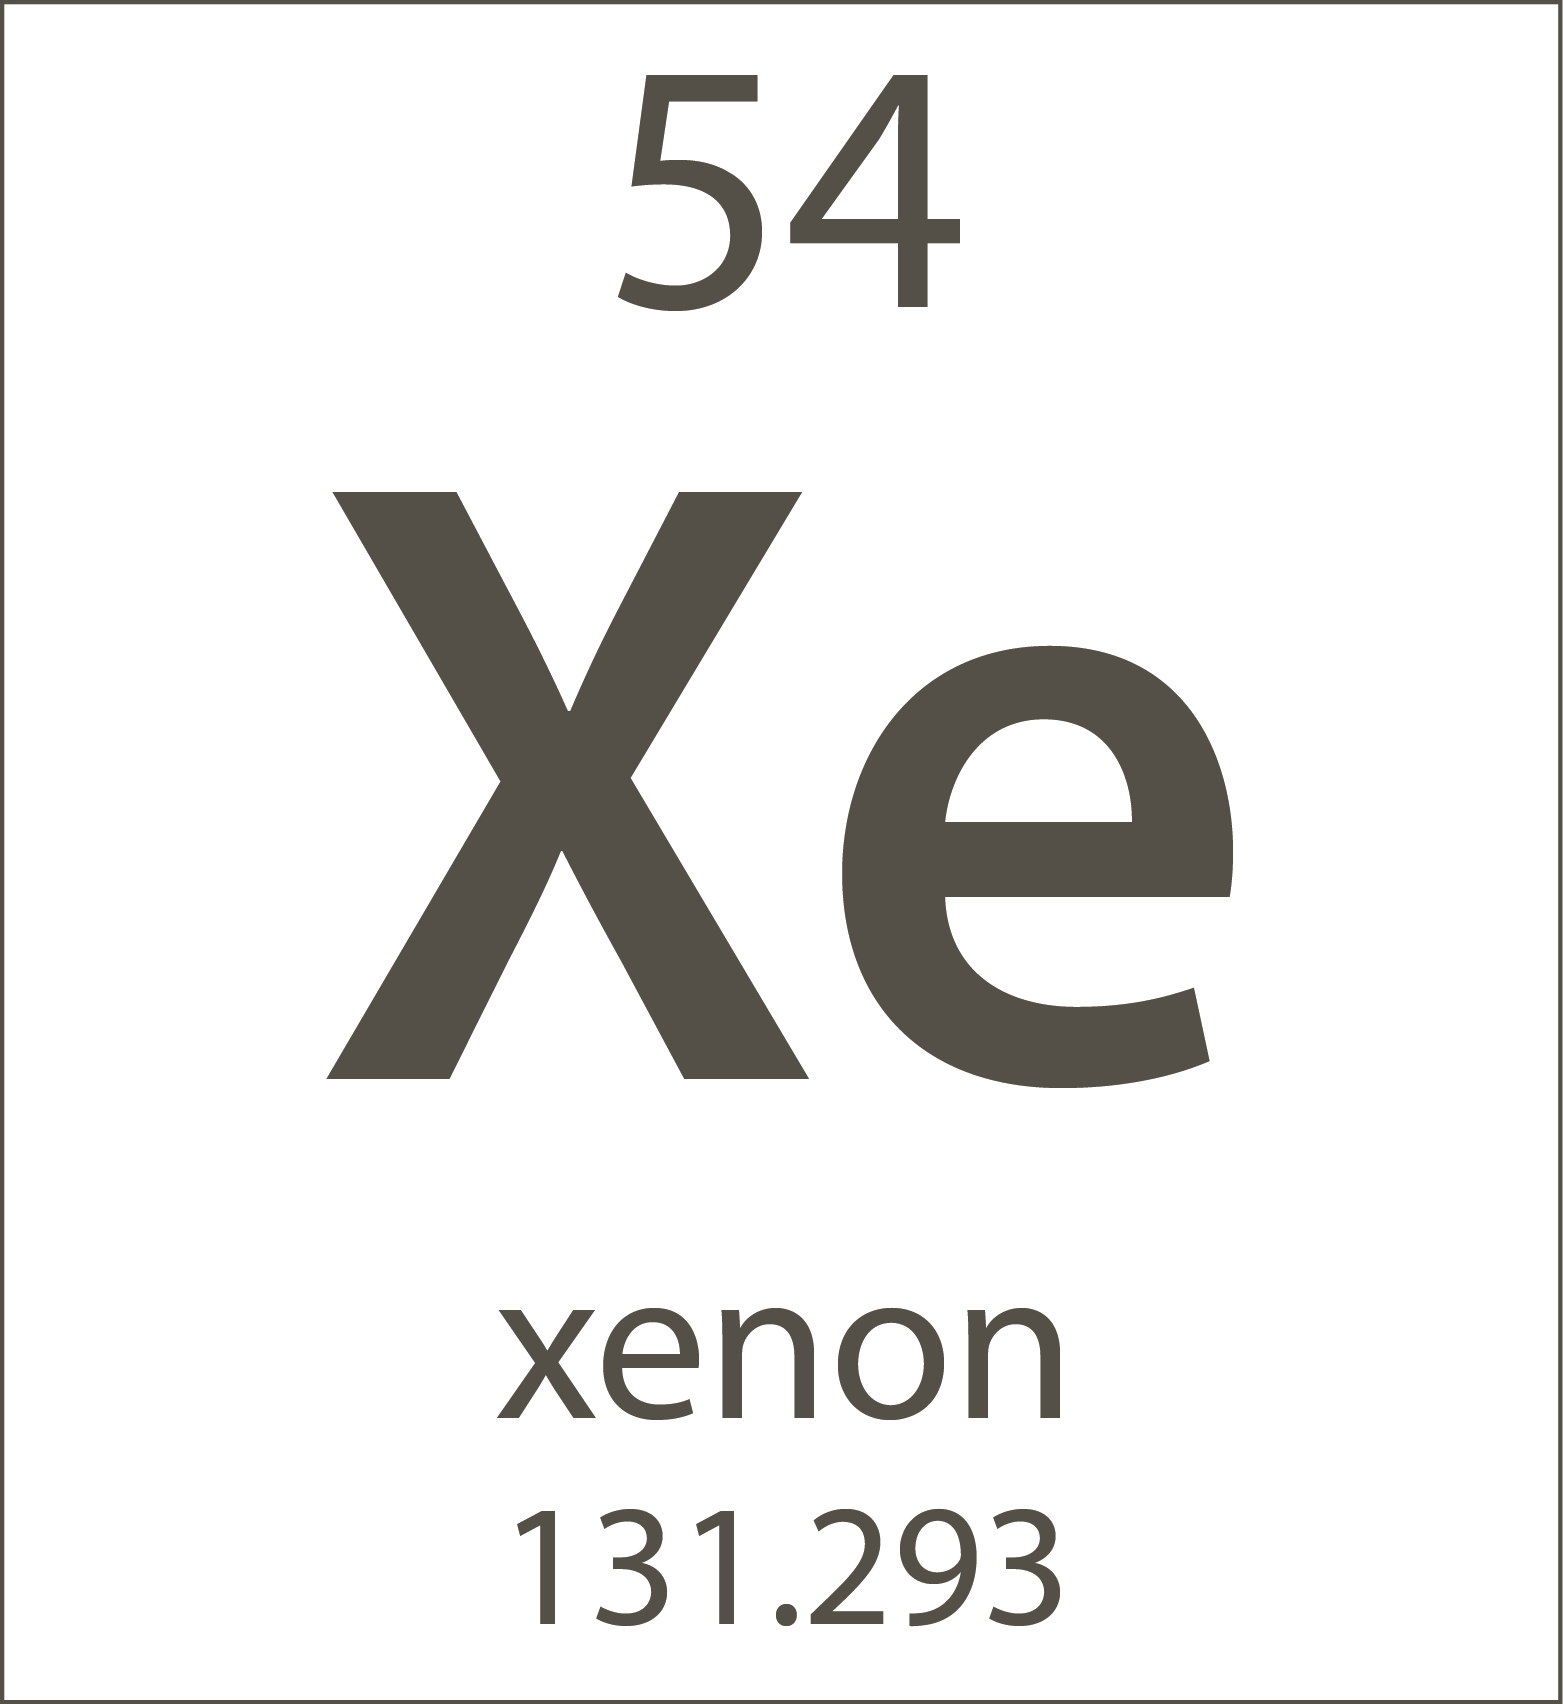 example of an element in the periodic table